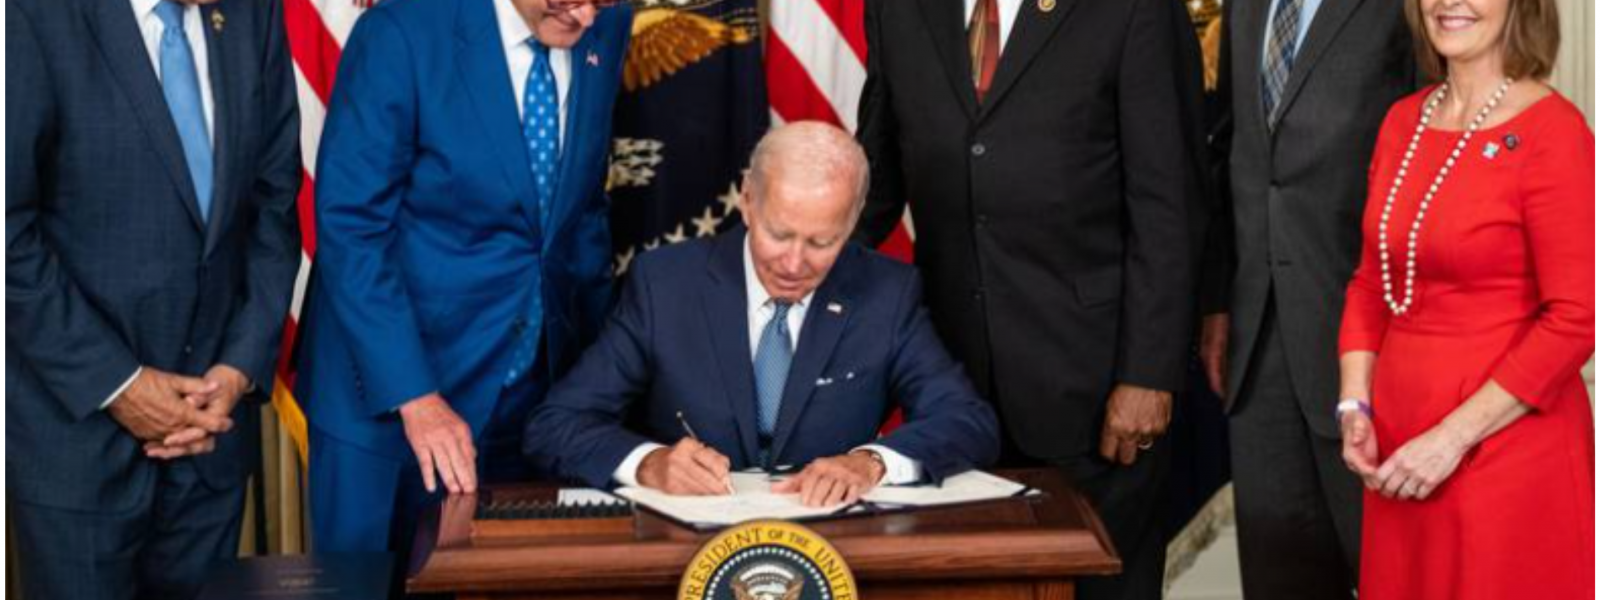 US President Joe Biden signing the Inflation Reduction Act surrounded by 5 leaders from the US Senate and House of Representatives